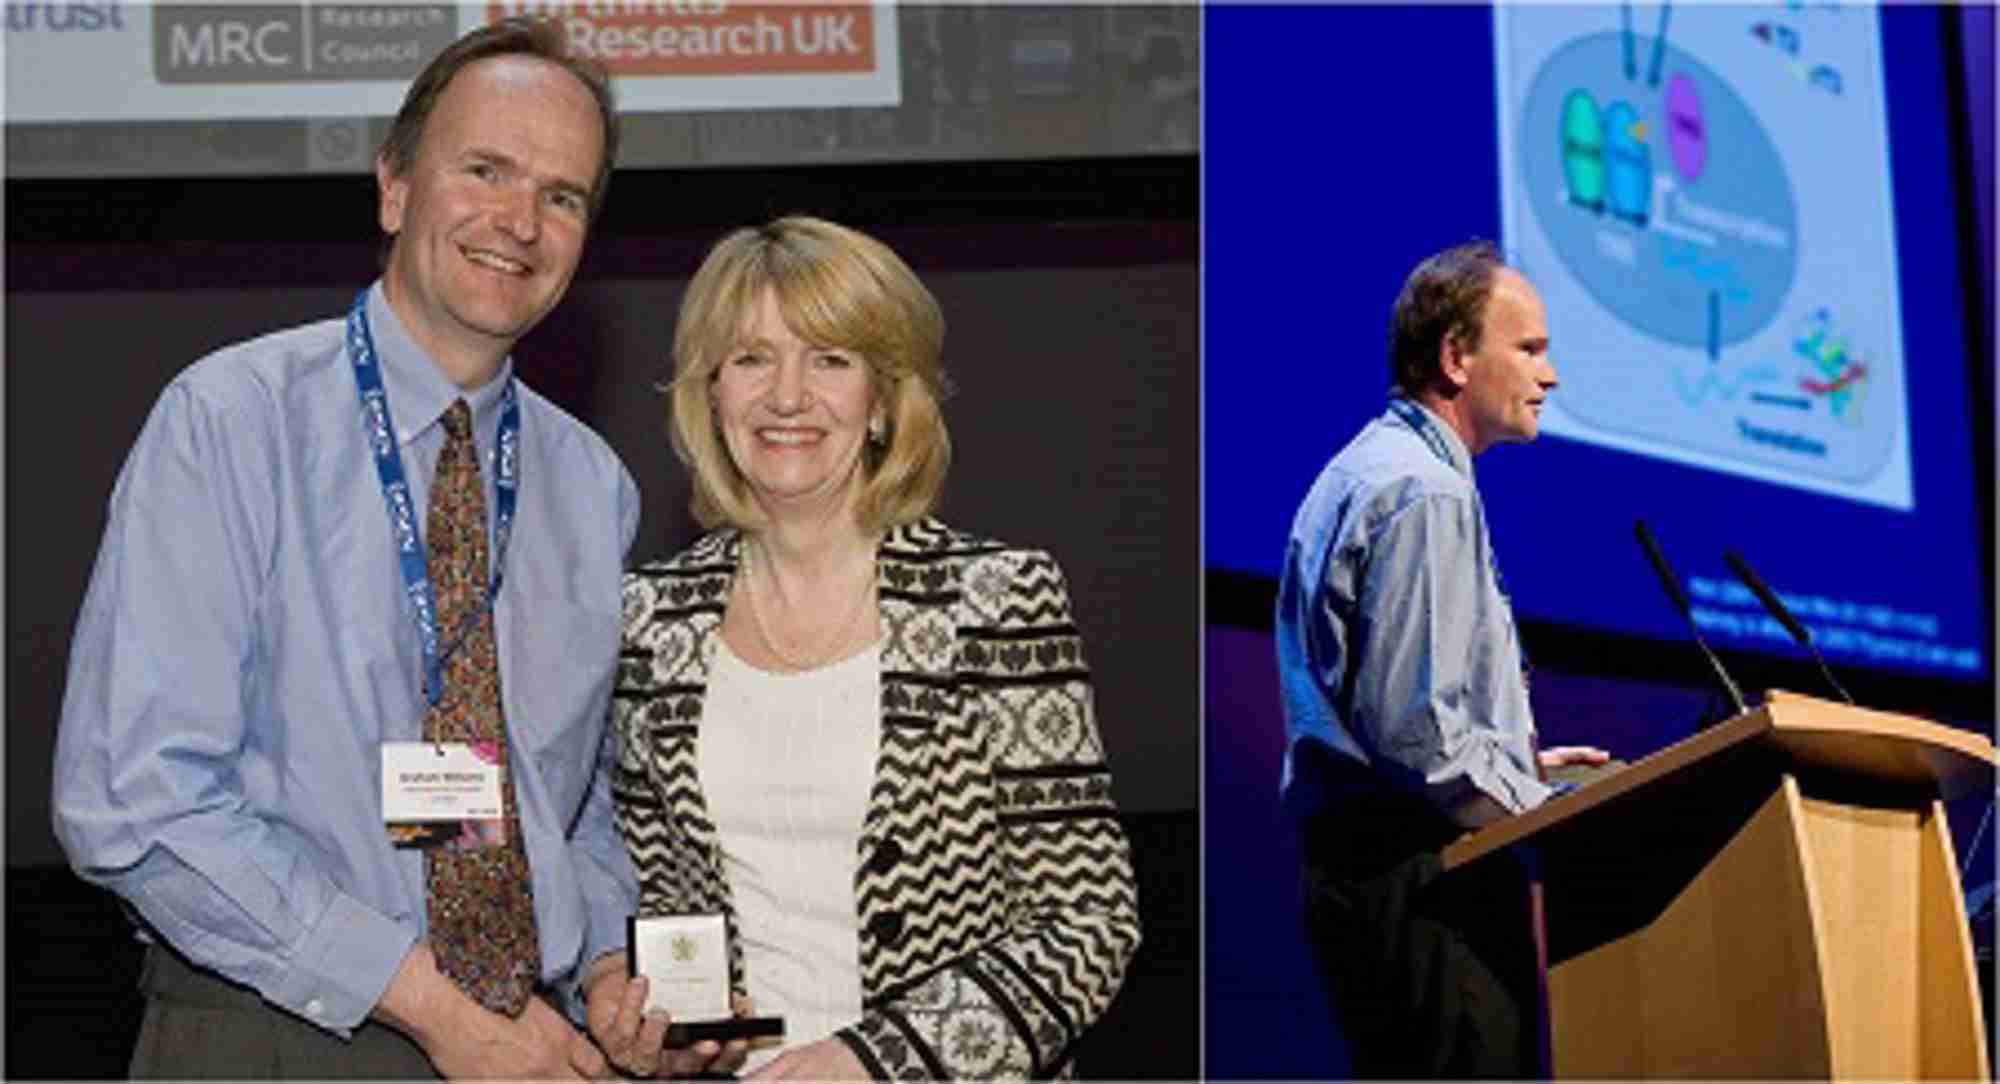 Graham (pictured with Julia Buckingham, former President of the Society) was awarded the Society for Endocrinology medal in 2011.